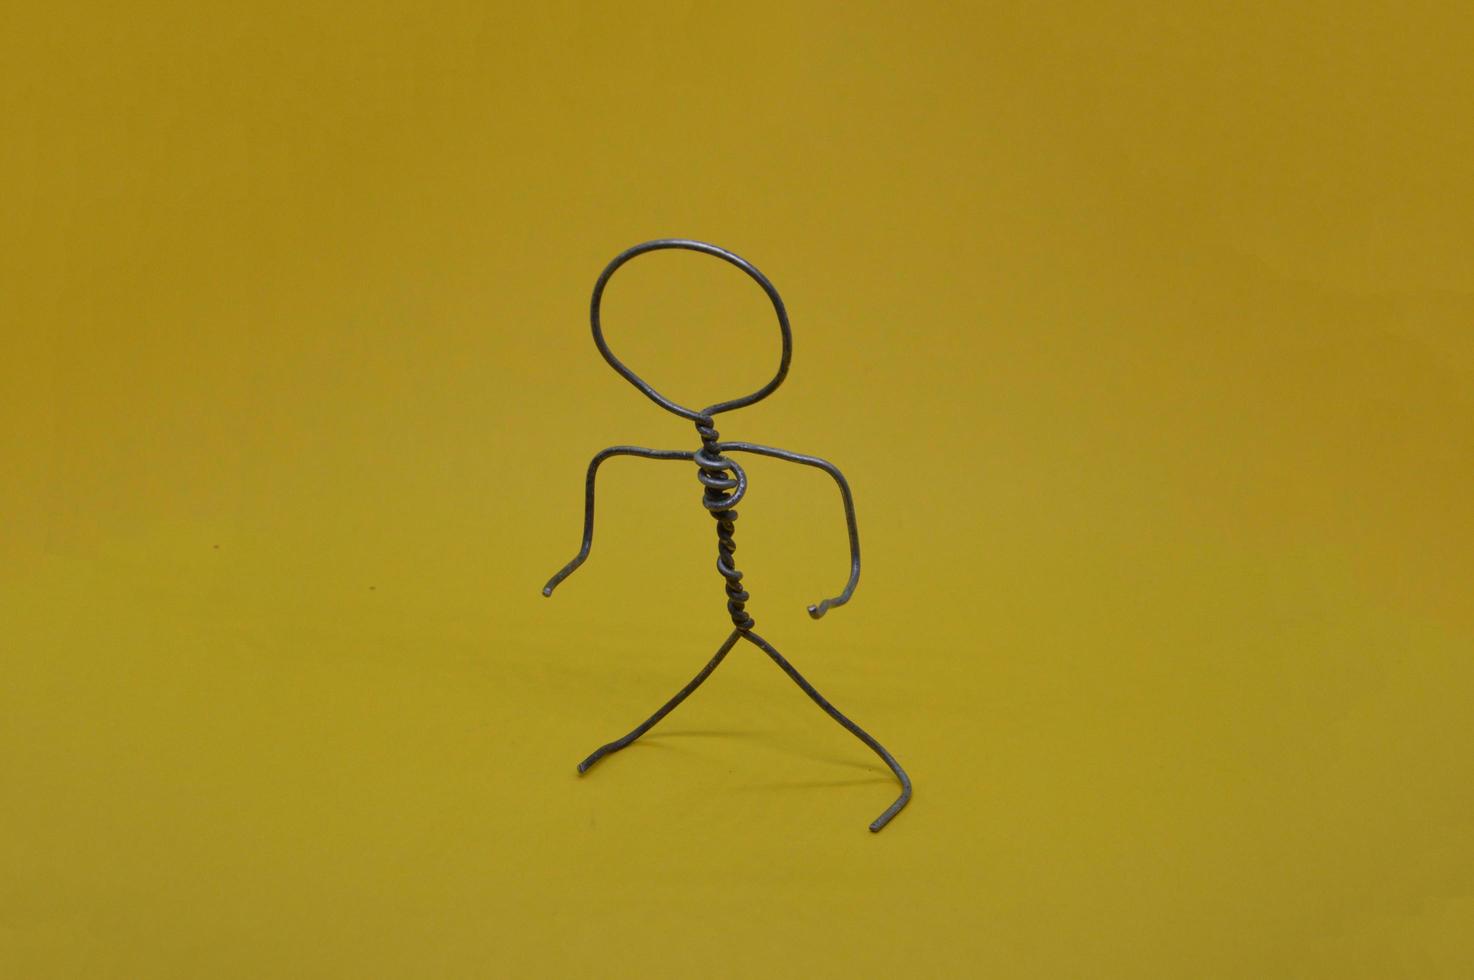 Metal man made of wire stands on yellow background photo